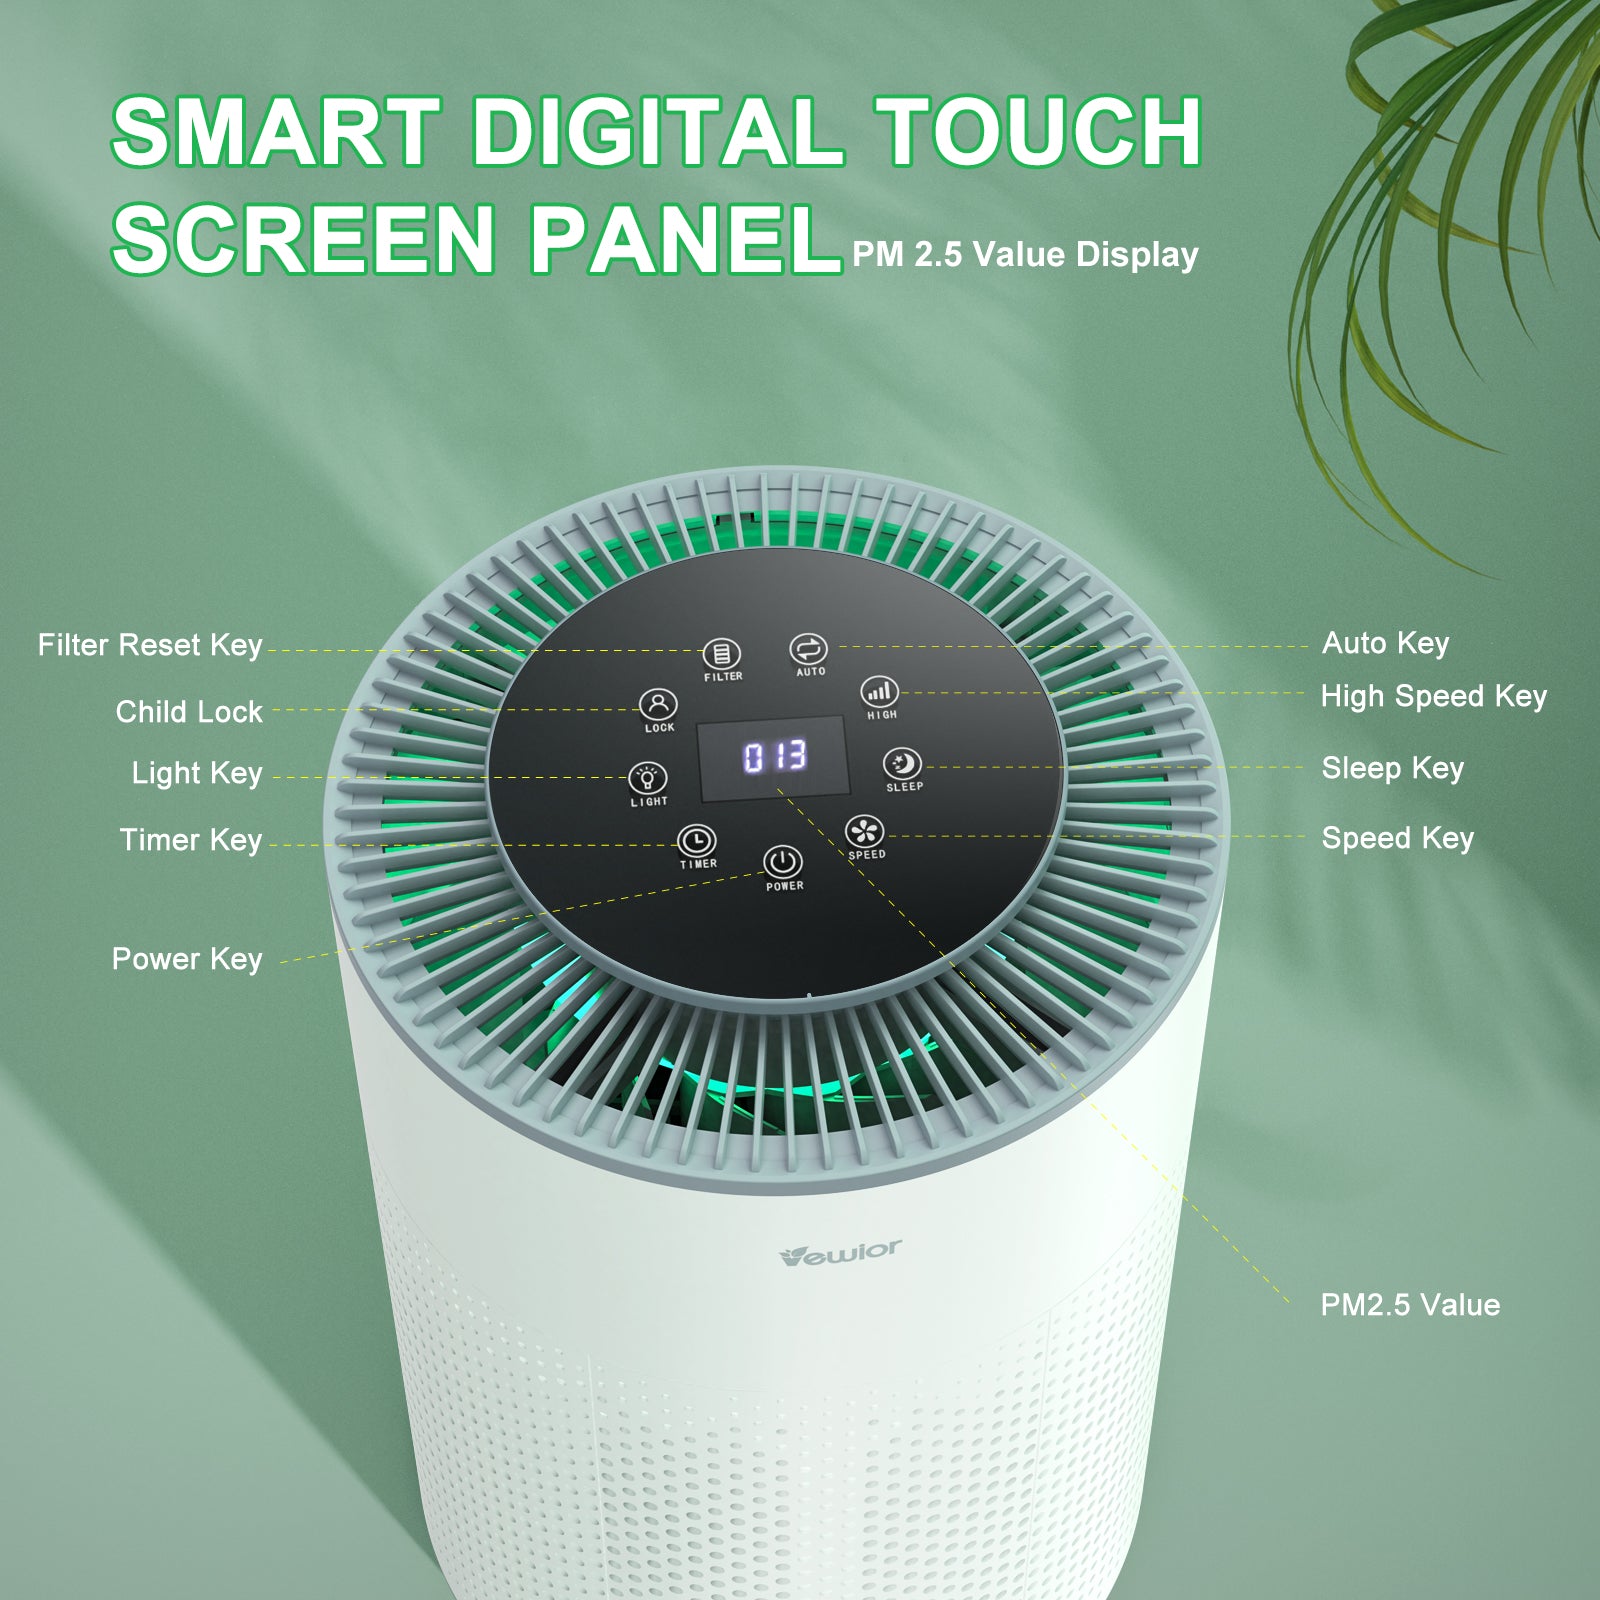 SMART DIGITAL TOUCH SCREEN PANEL PM 2.5 Value Display 